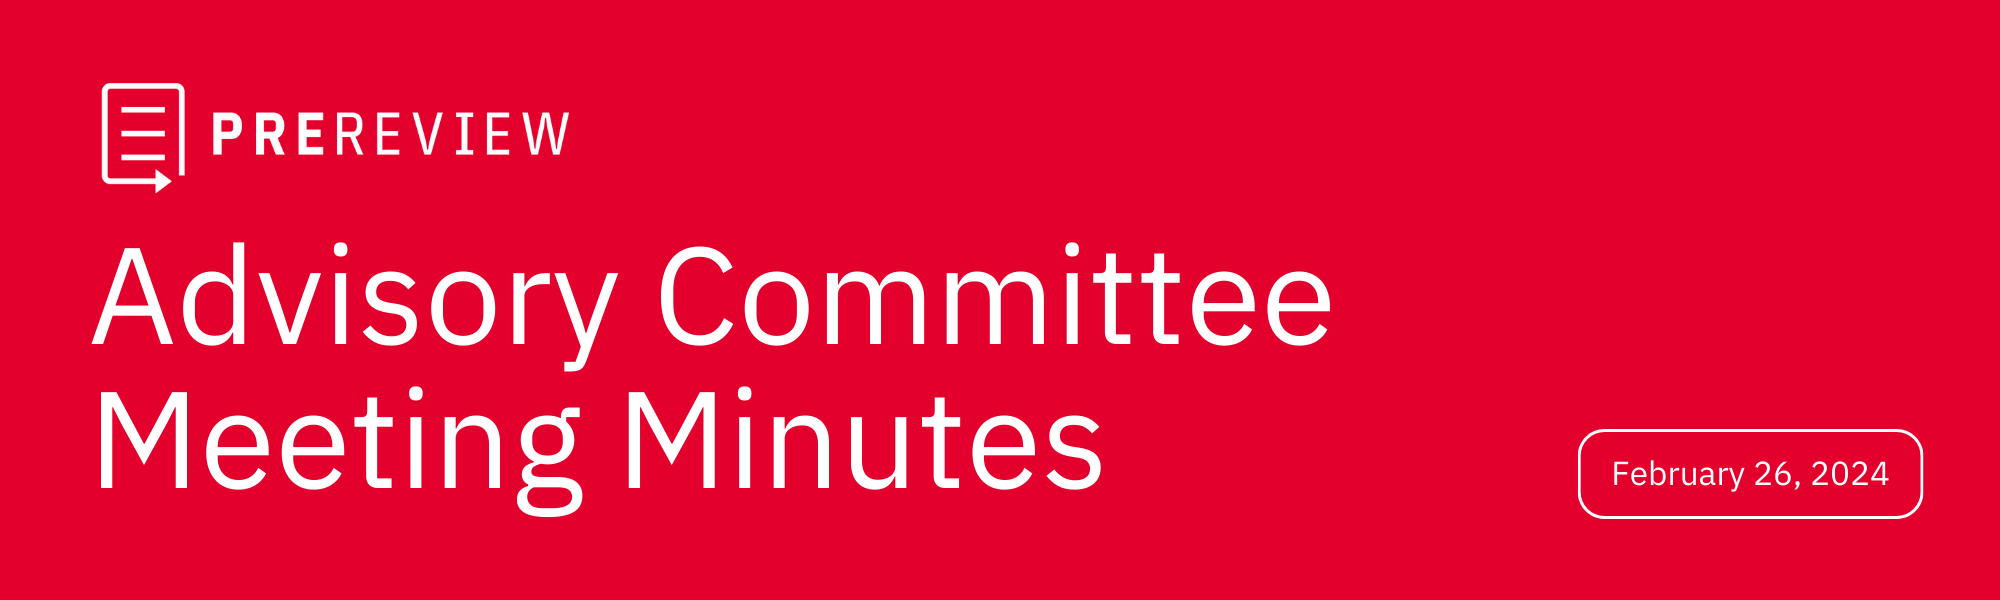 PREreview logo, white on a red background. Writing says: Advisory Committee Meeting Minutes - 2024-2-26